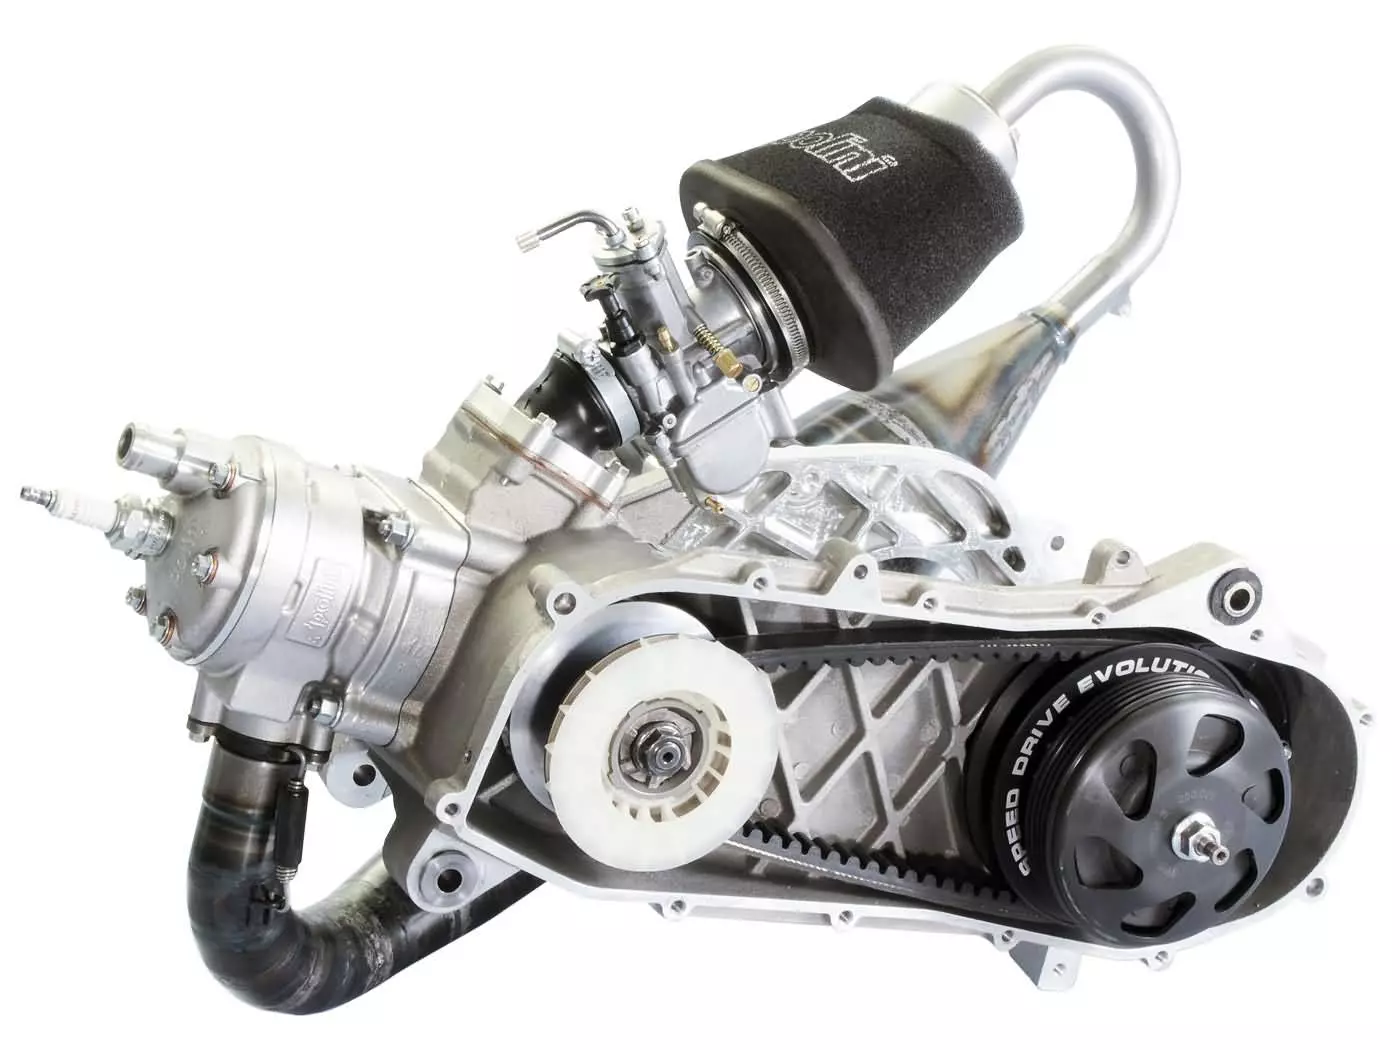 Racing Engine Polini Evolution P.R.E. 100cc 50mm For Piaggio Zip SP, Zip 2 SP With Disc Brake